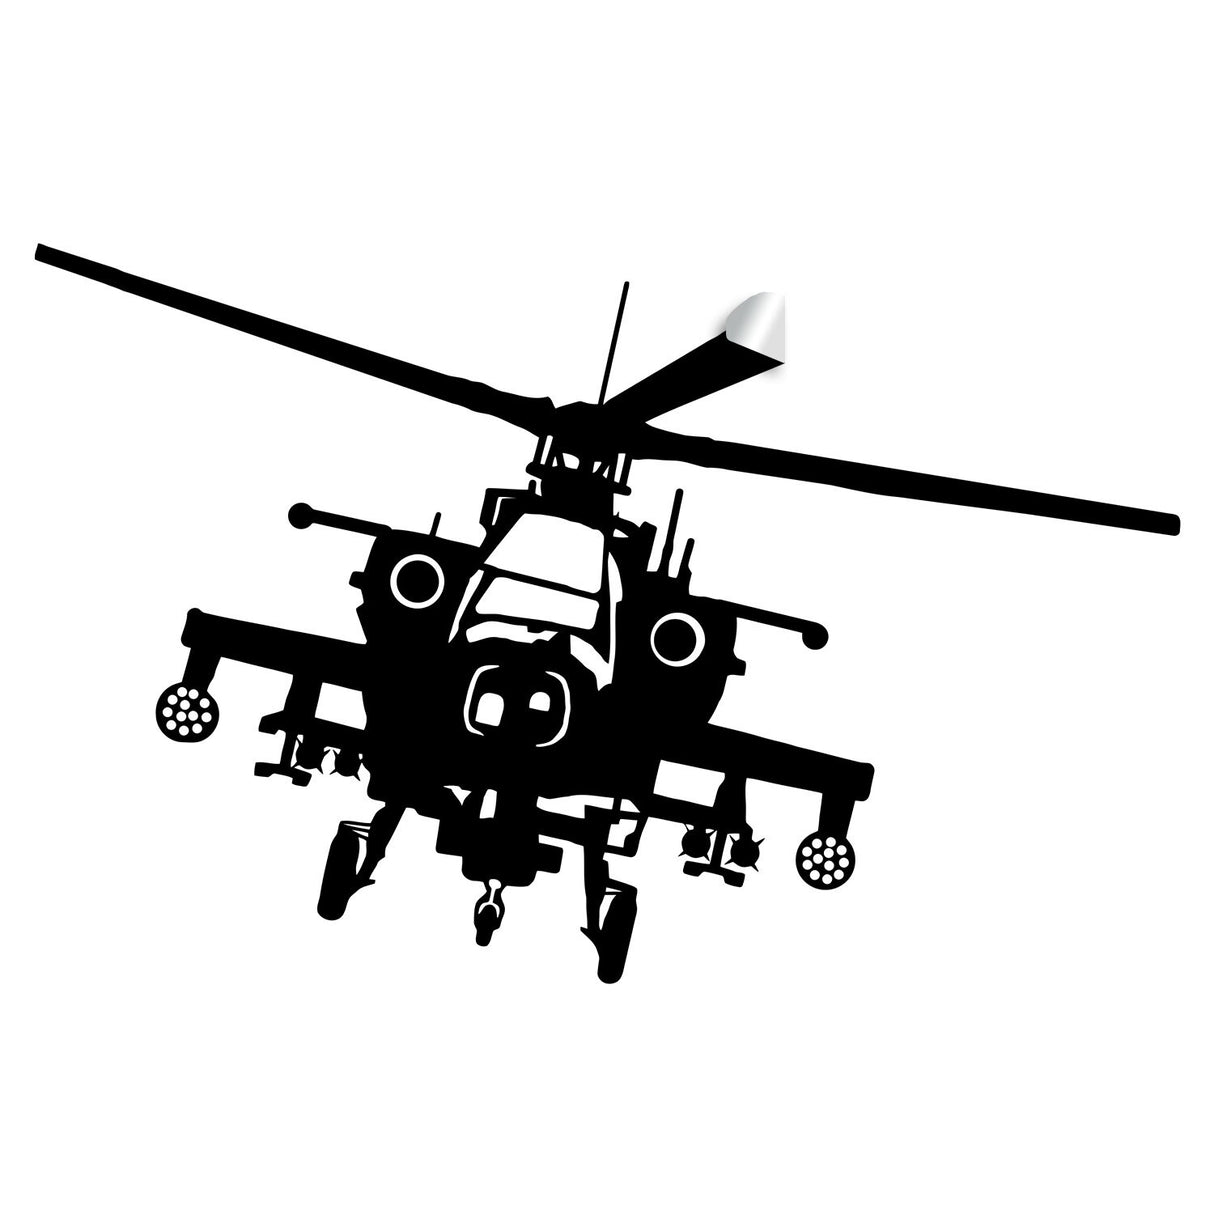 Helicopter Wall Sticker - Art Copter Vinyl Decal